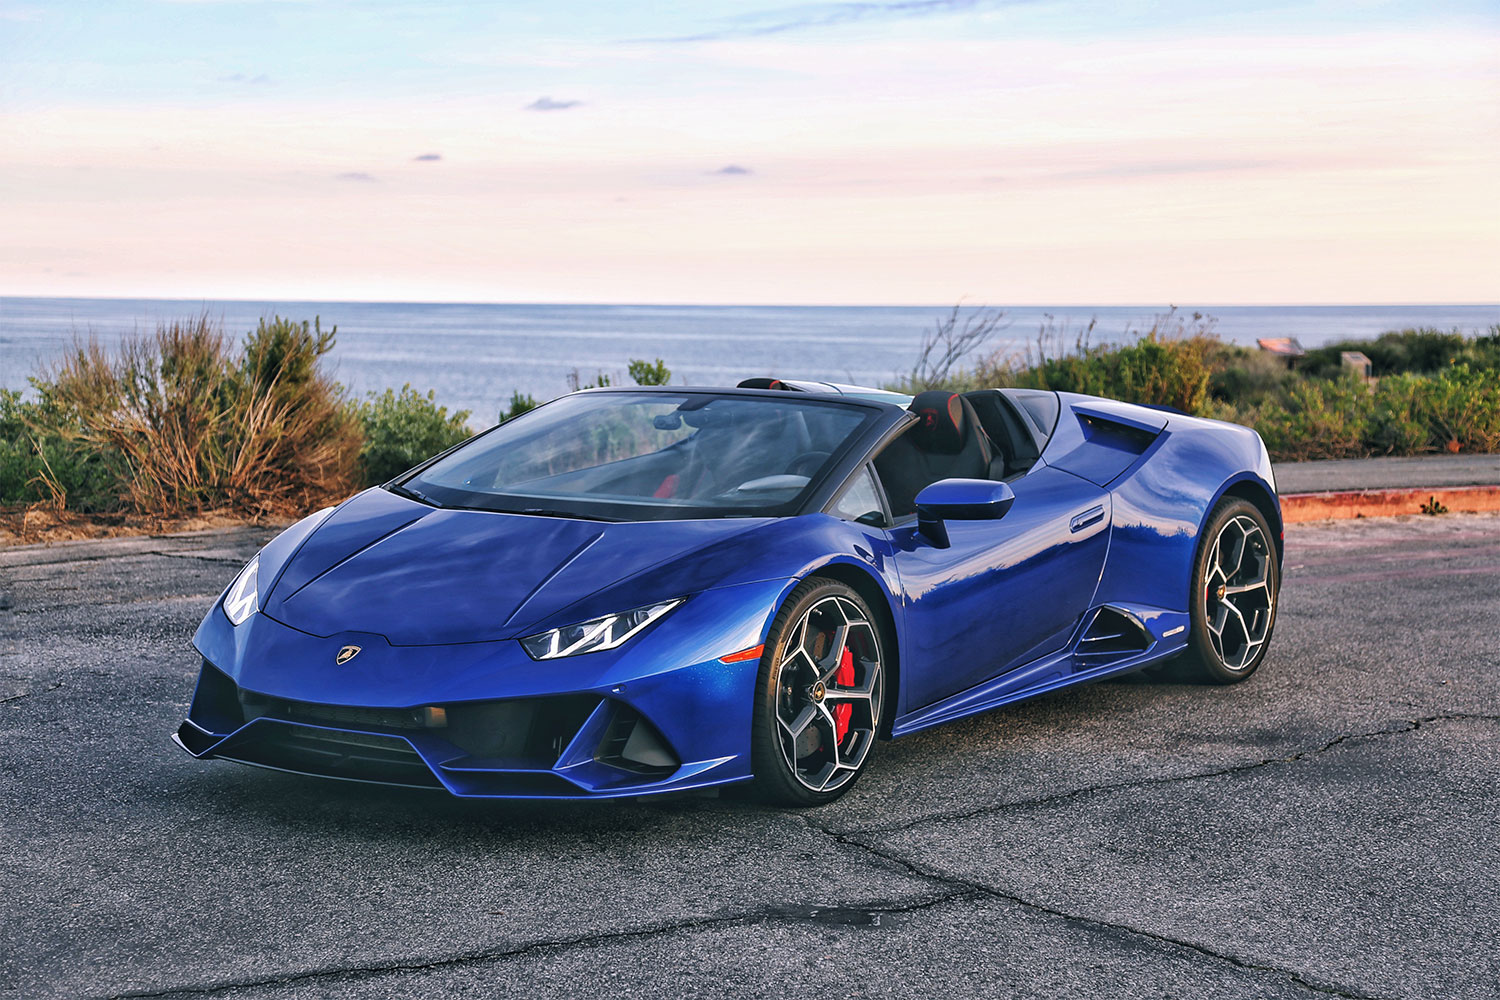 The Lamborghini Huracan EVO Spyder Is the Sound of Fury in a Quieting World  - The Manual